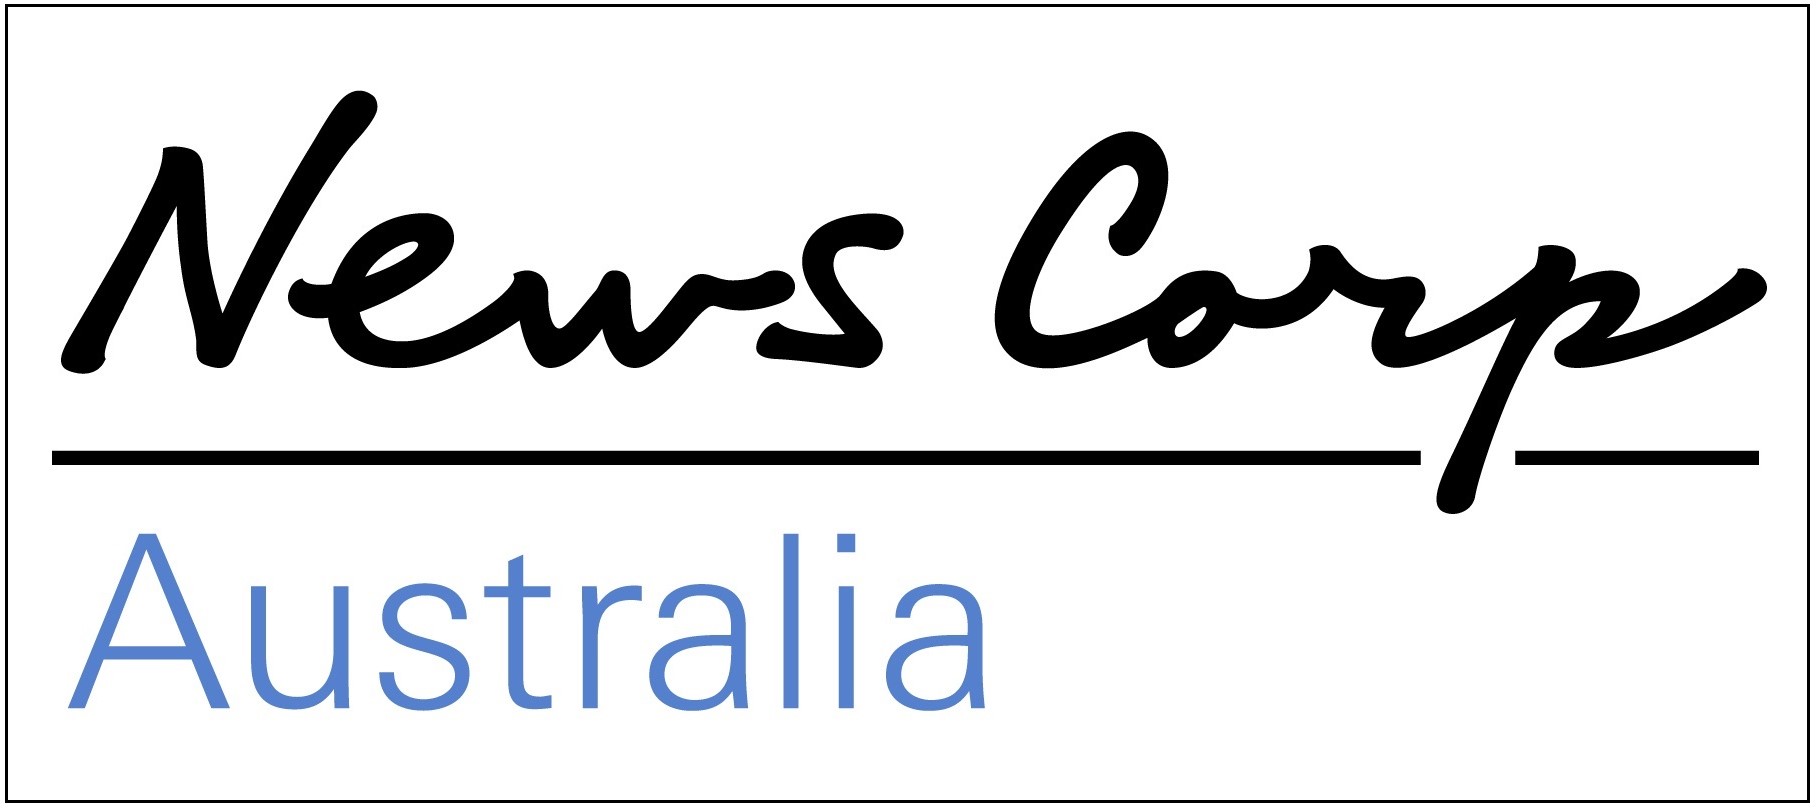 News Corp Australia to announce distribution changes to SE QLD and northern NSW today